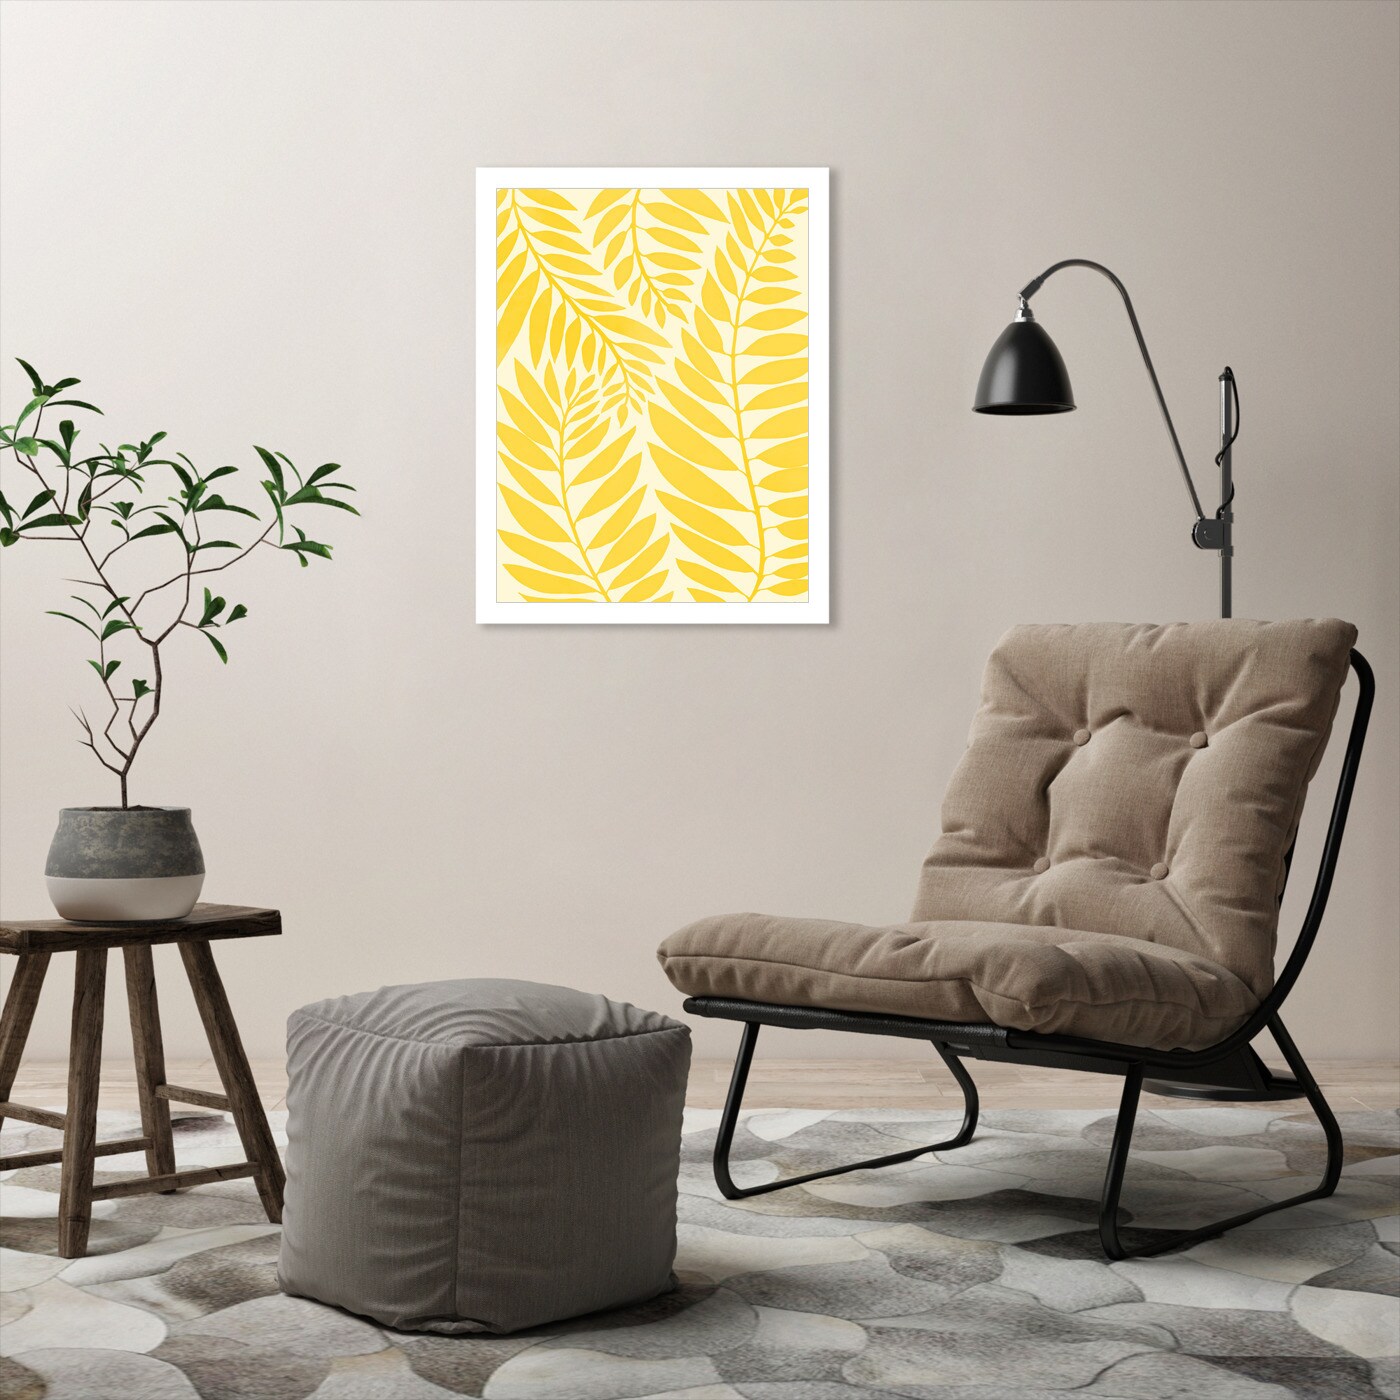 Golden Yellow Leaves by Modern Tropical Frame  - Americanflat